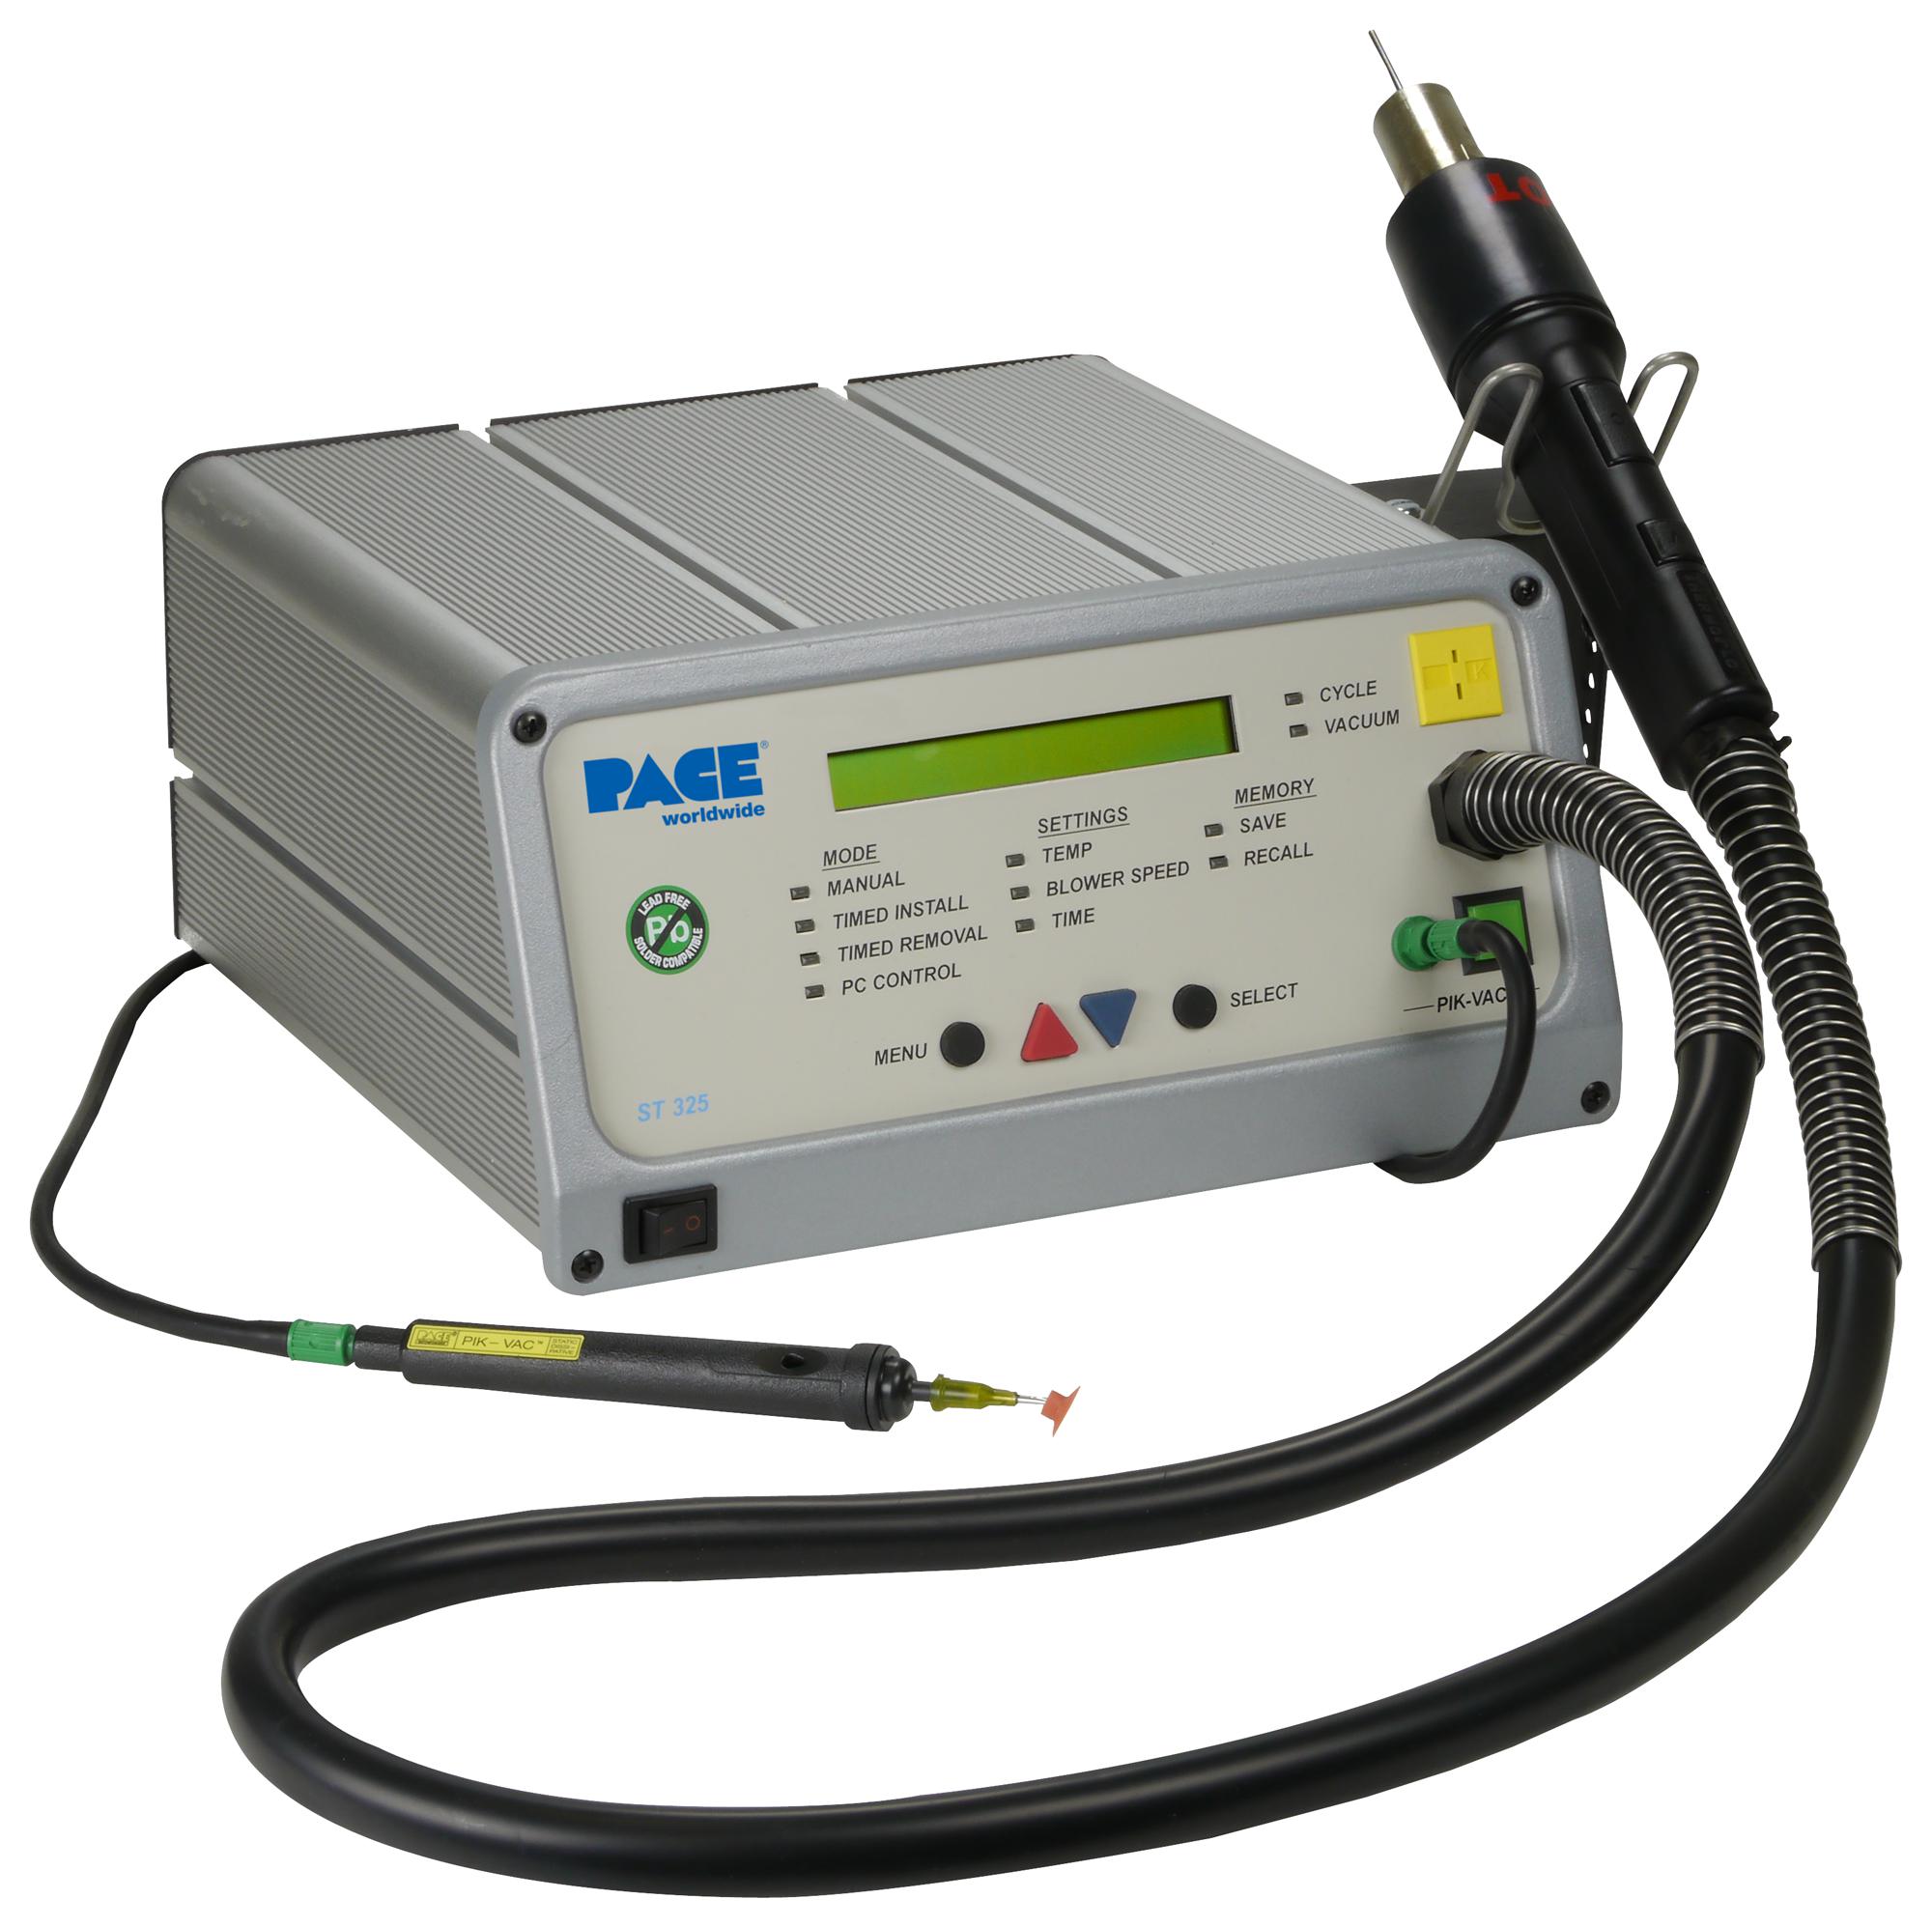 8007-0432 SOLDERING SYSTEM, HOT AIR, ST 325 PACE